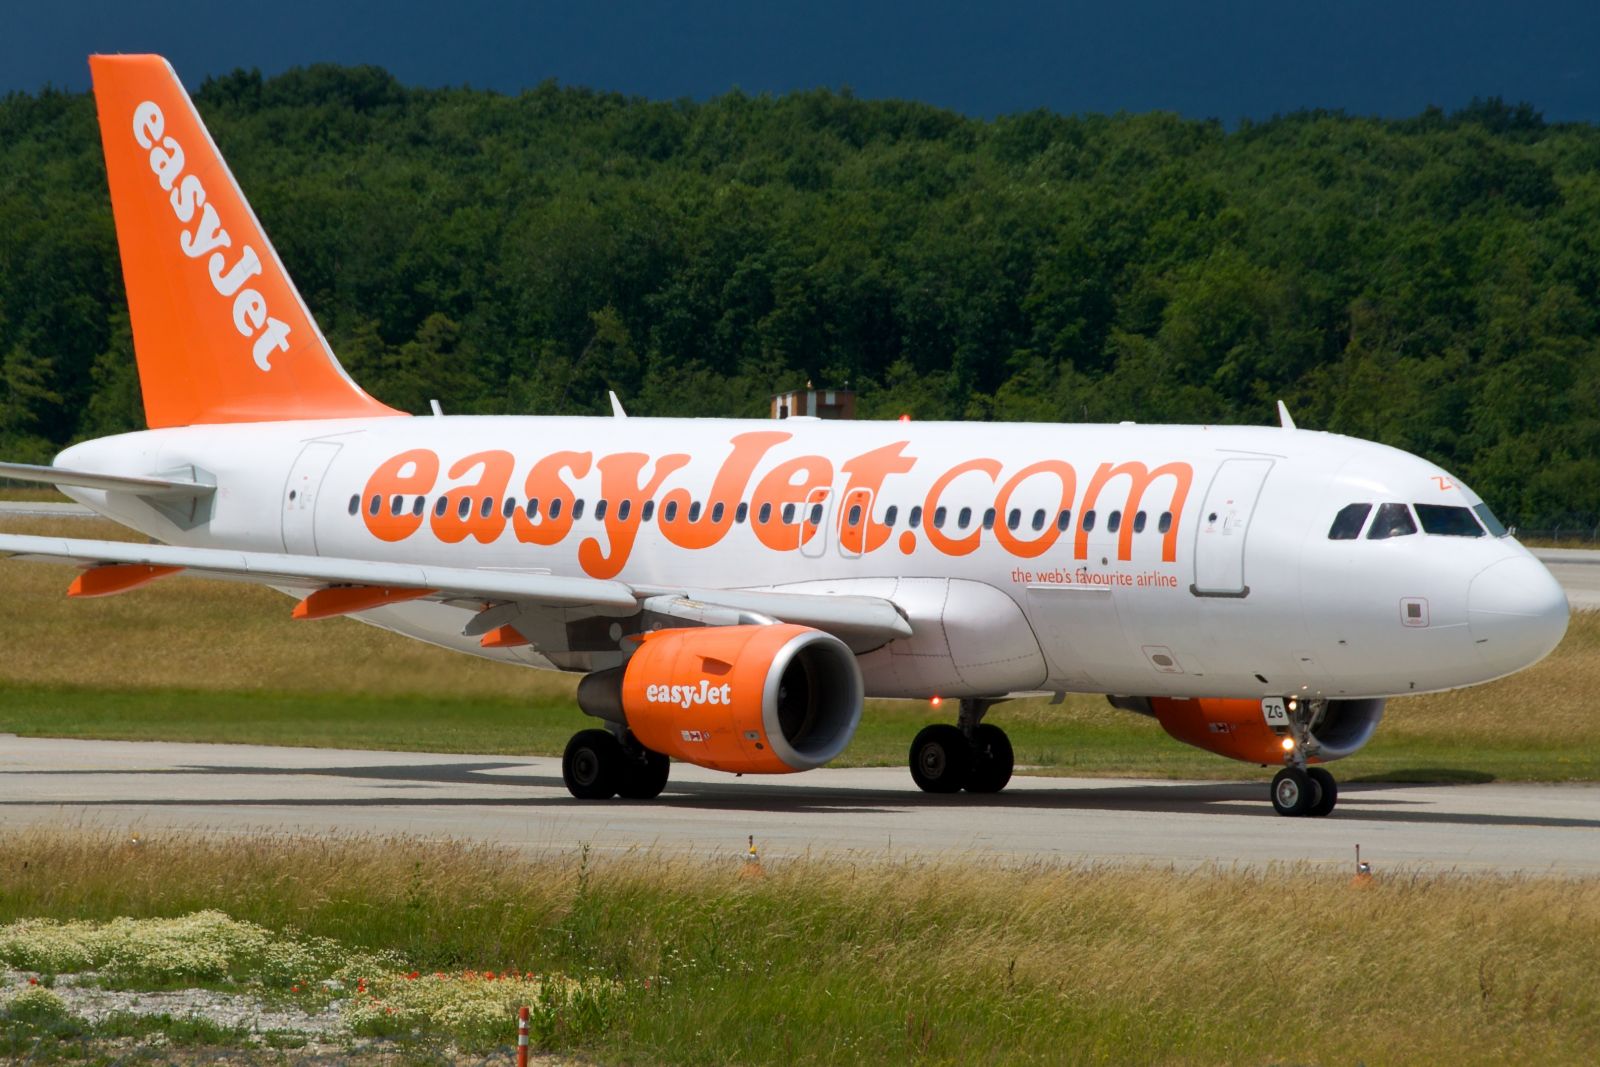 travel insurance with easyjet